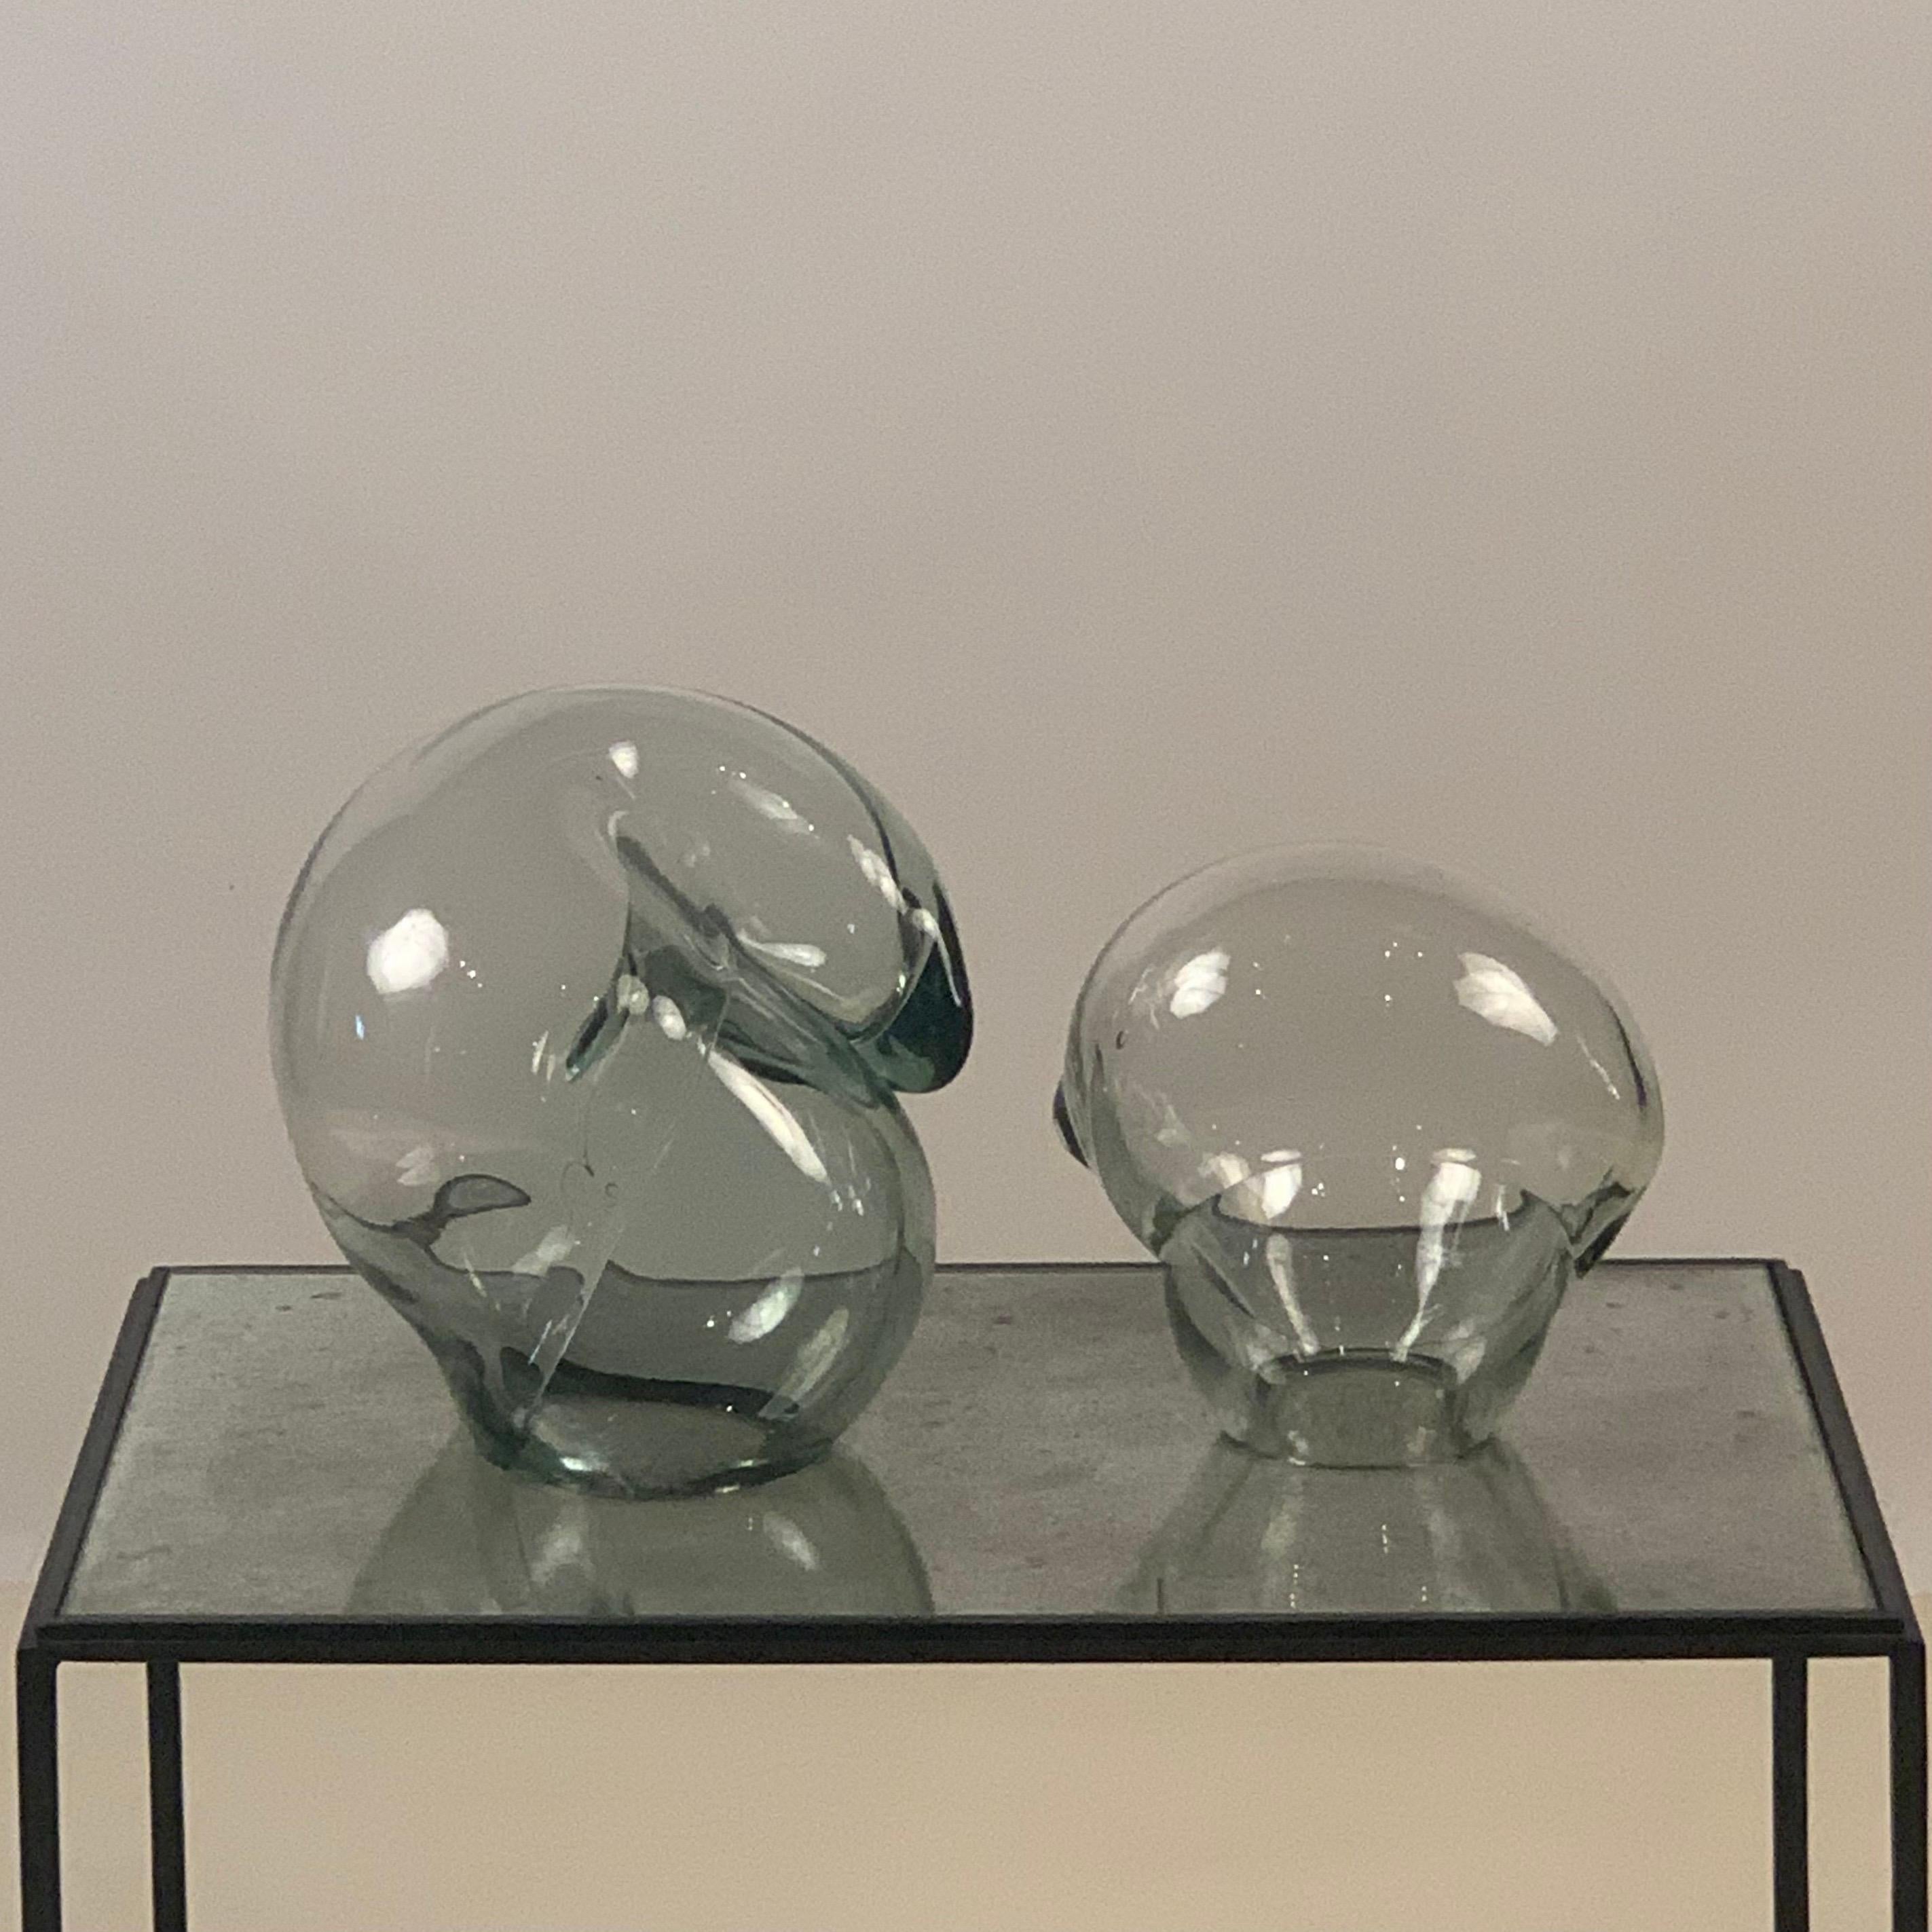 Set of two clear art glass orb sculptures by John Bingham, circa 1980. Signed (engraved) 